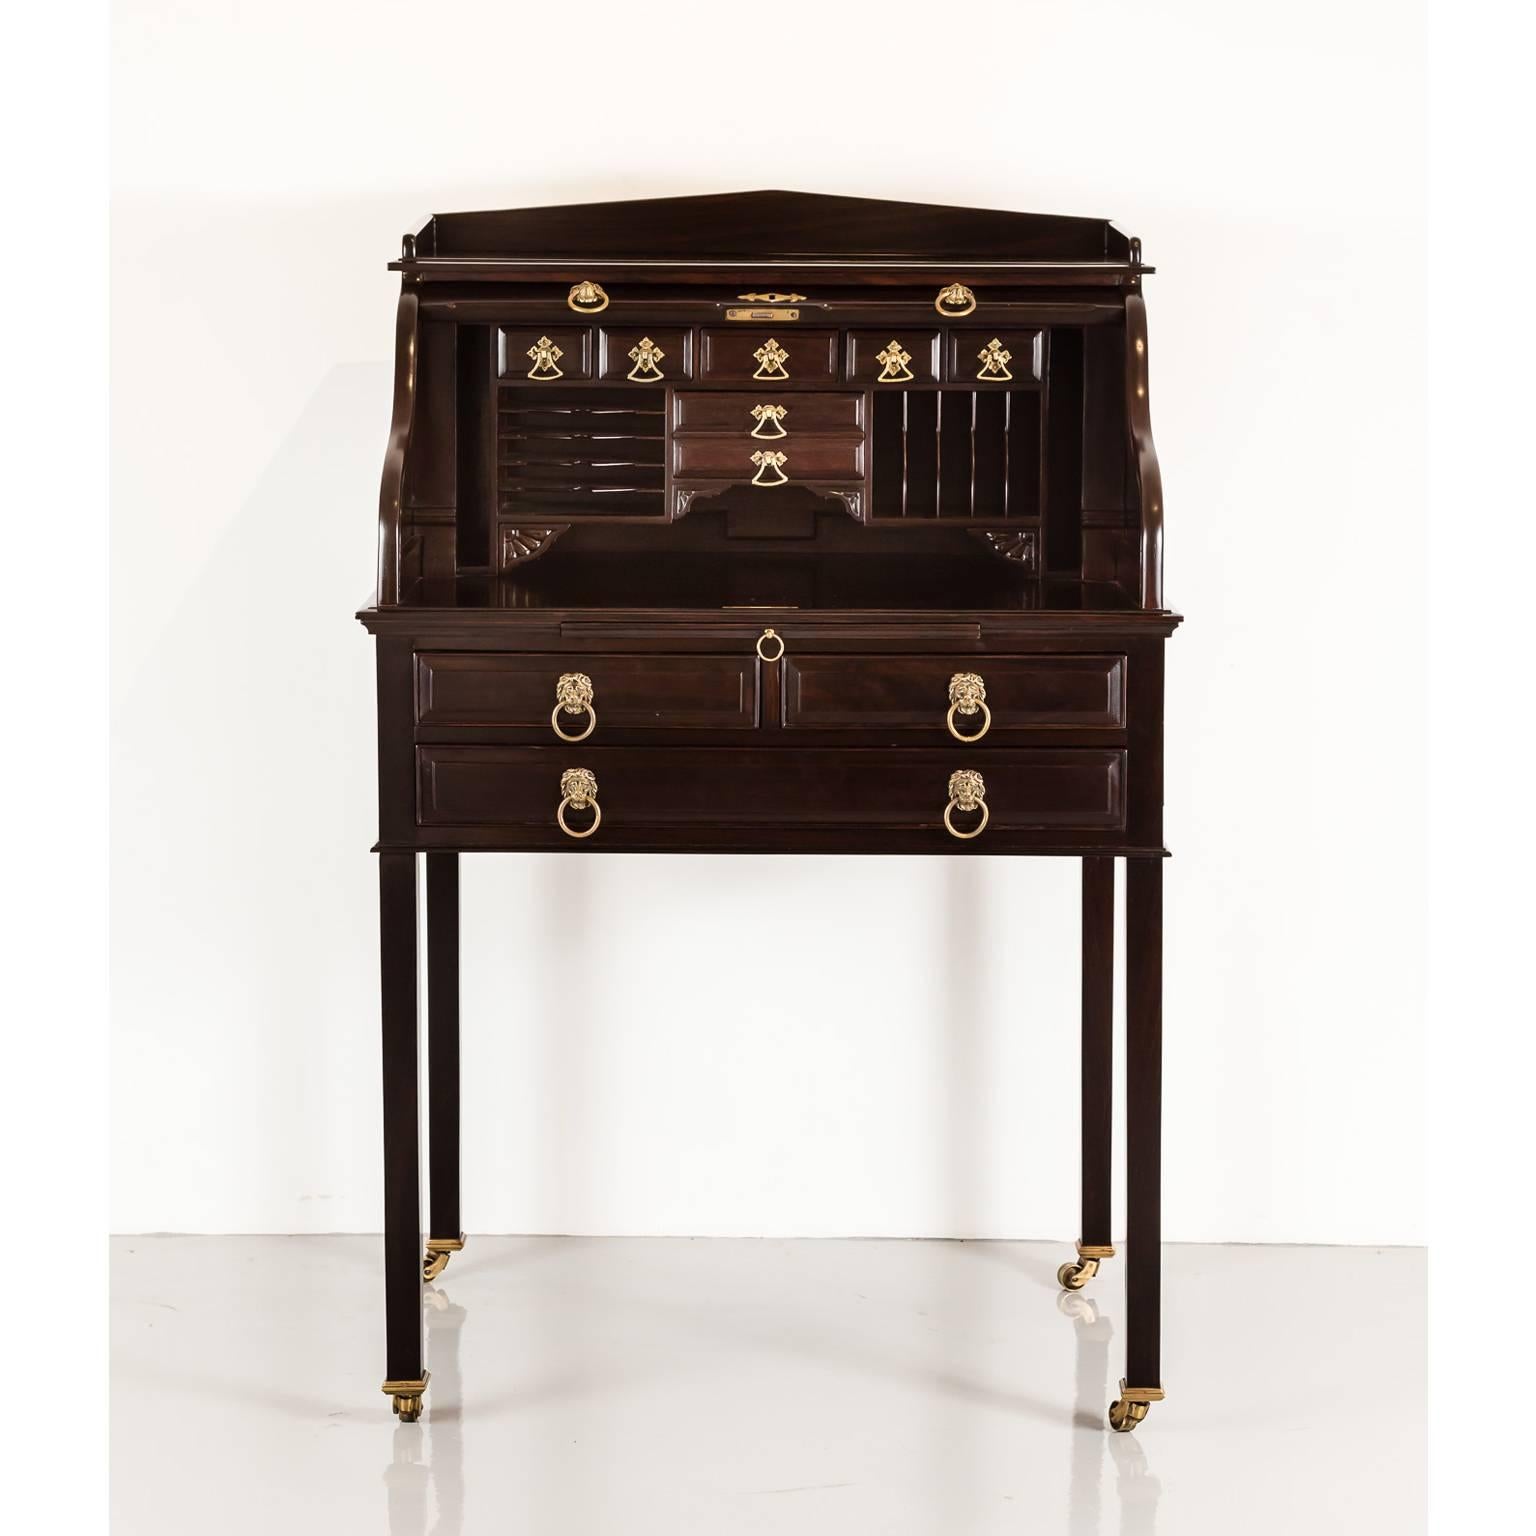 A unique British colonial rosewood secretaire which has cleverly constructed hidden trick-openings for its front drawers. 
The desk has a shaped back above a rectangular moulded top and a roll top fall front. The top opens to reveal a fitted